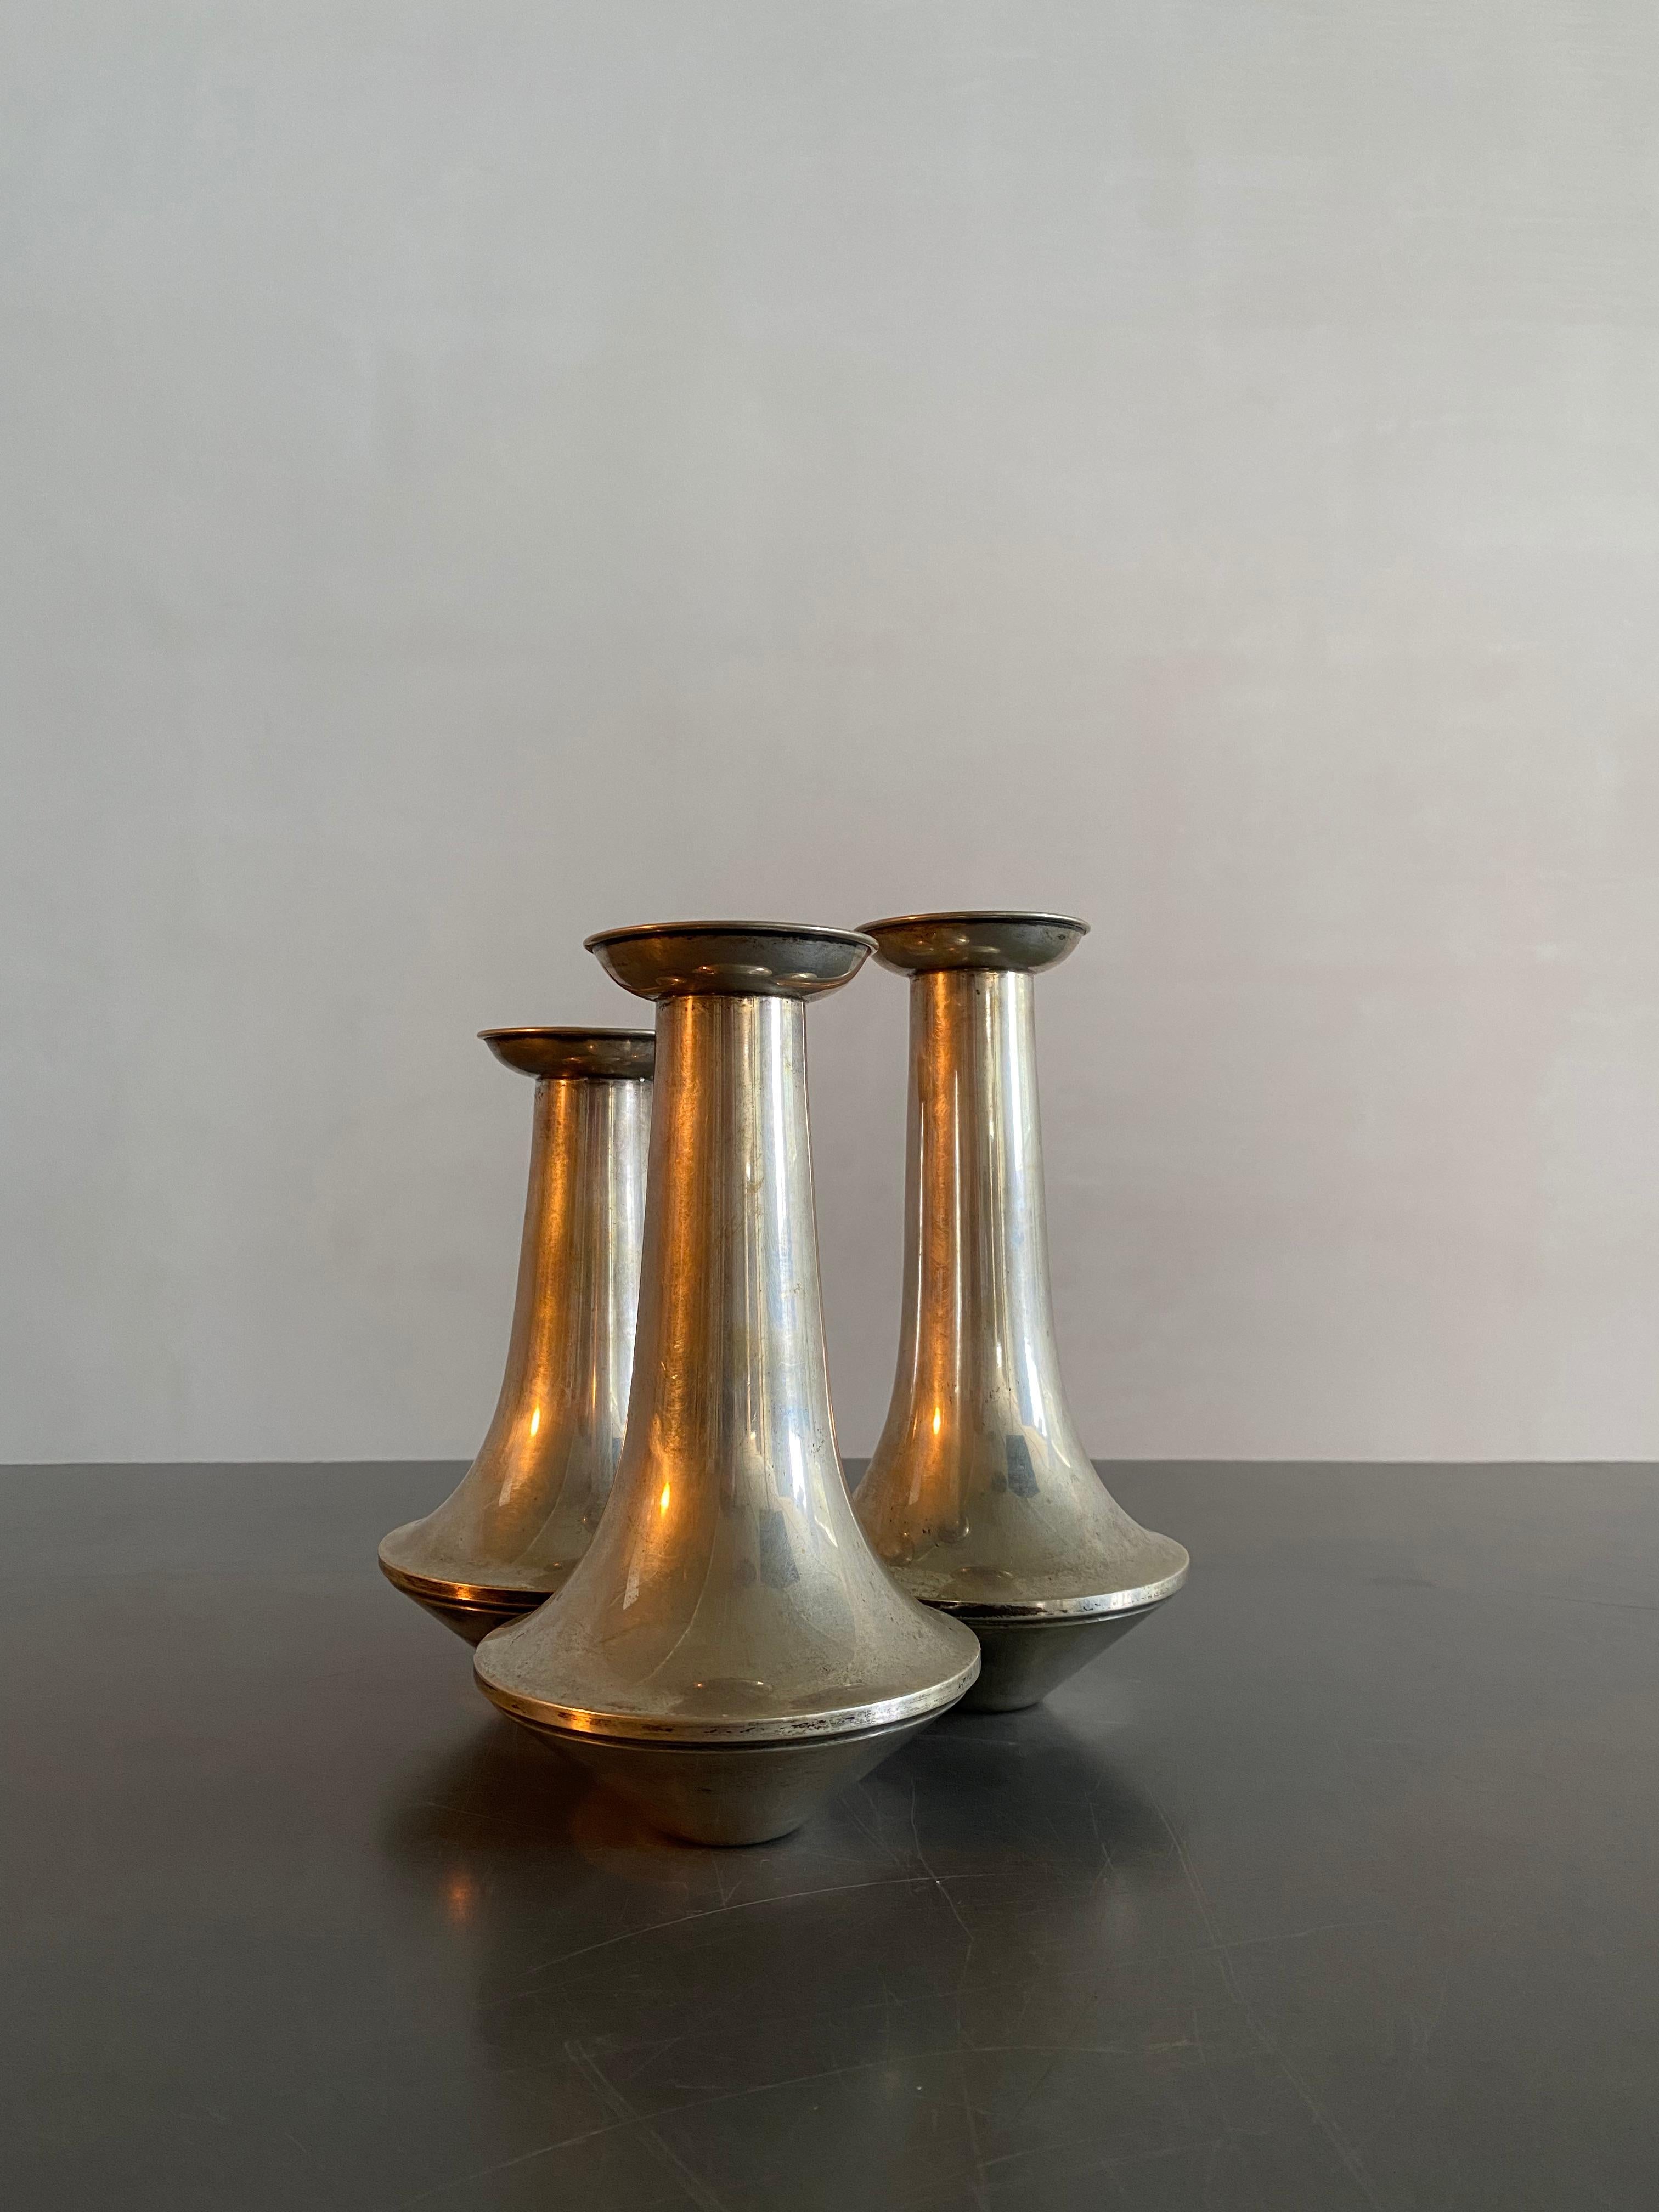 Three joined silver plated vases. All three have a slight difference in height for a beautiful flower arrangement.